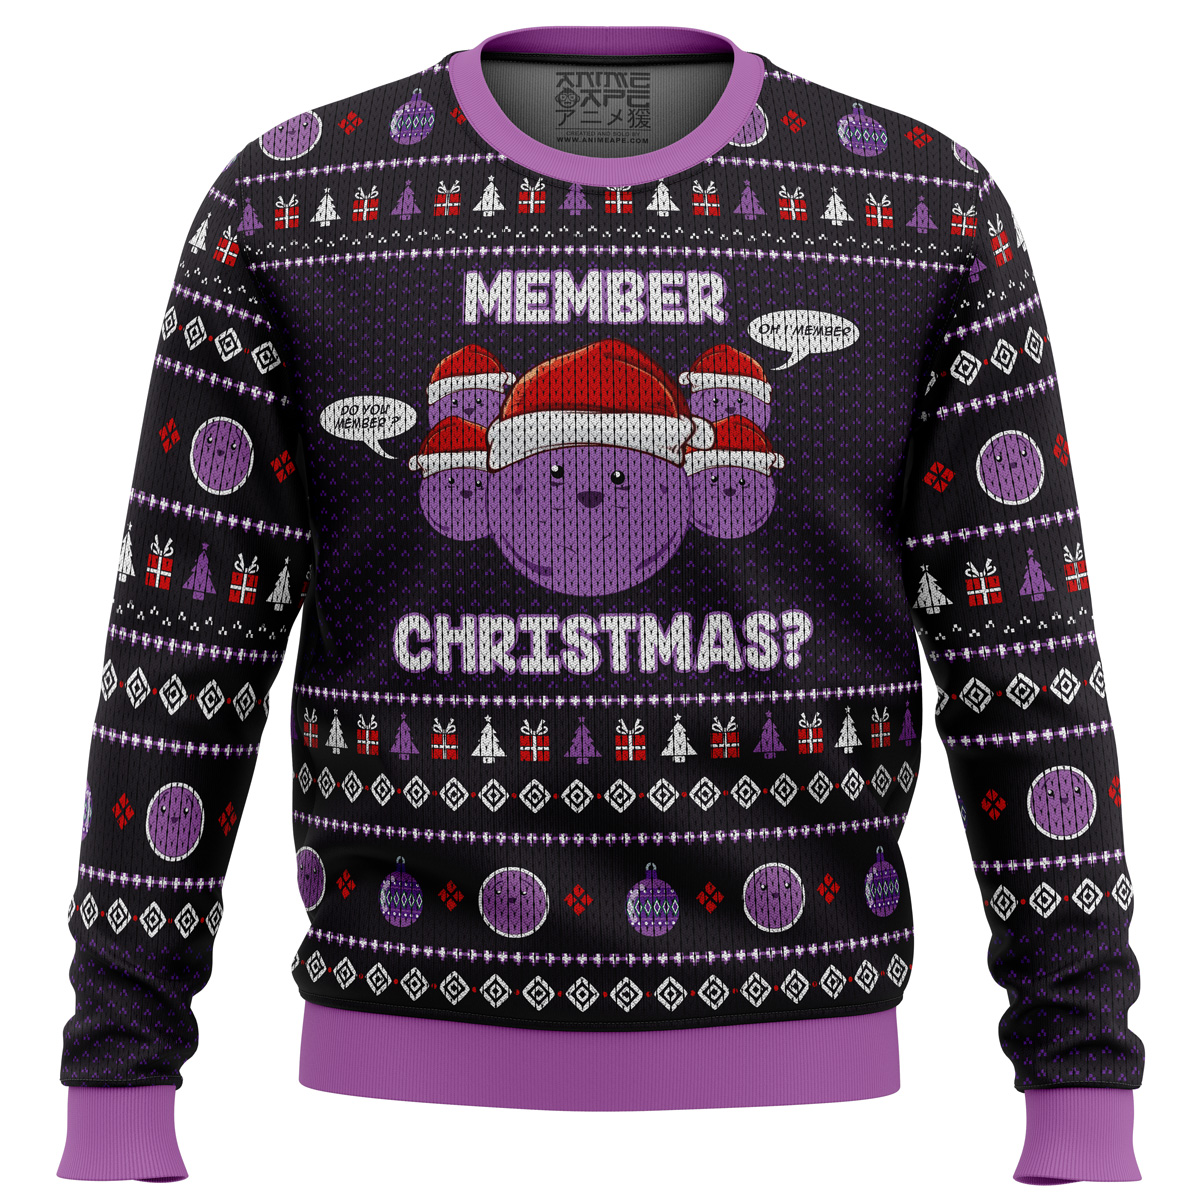 member berries south park ugly christmas sweater ana2207 8300 - Fandomaniax Store